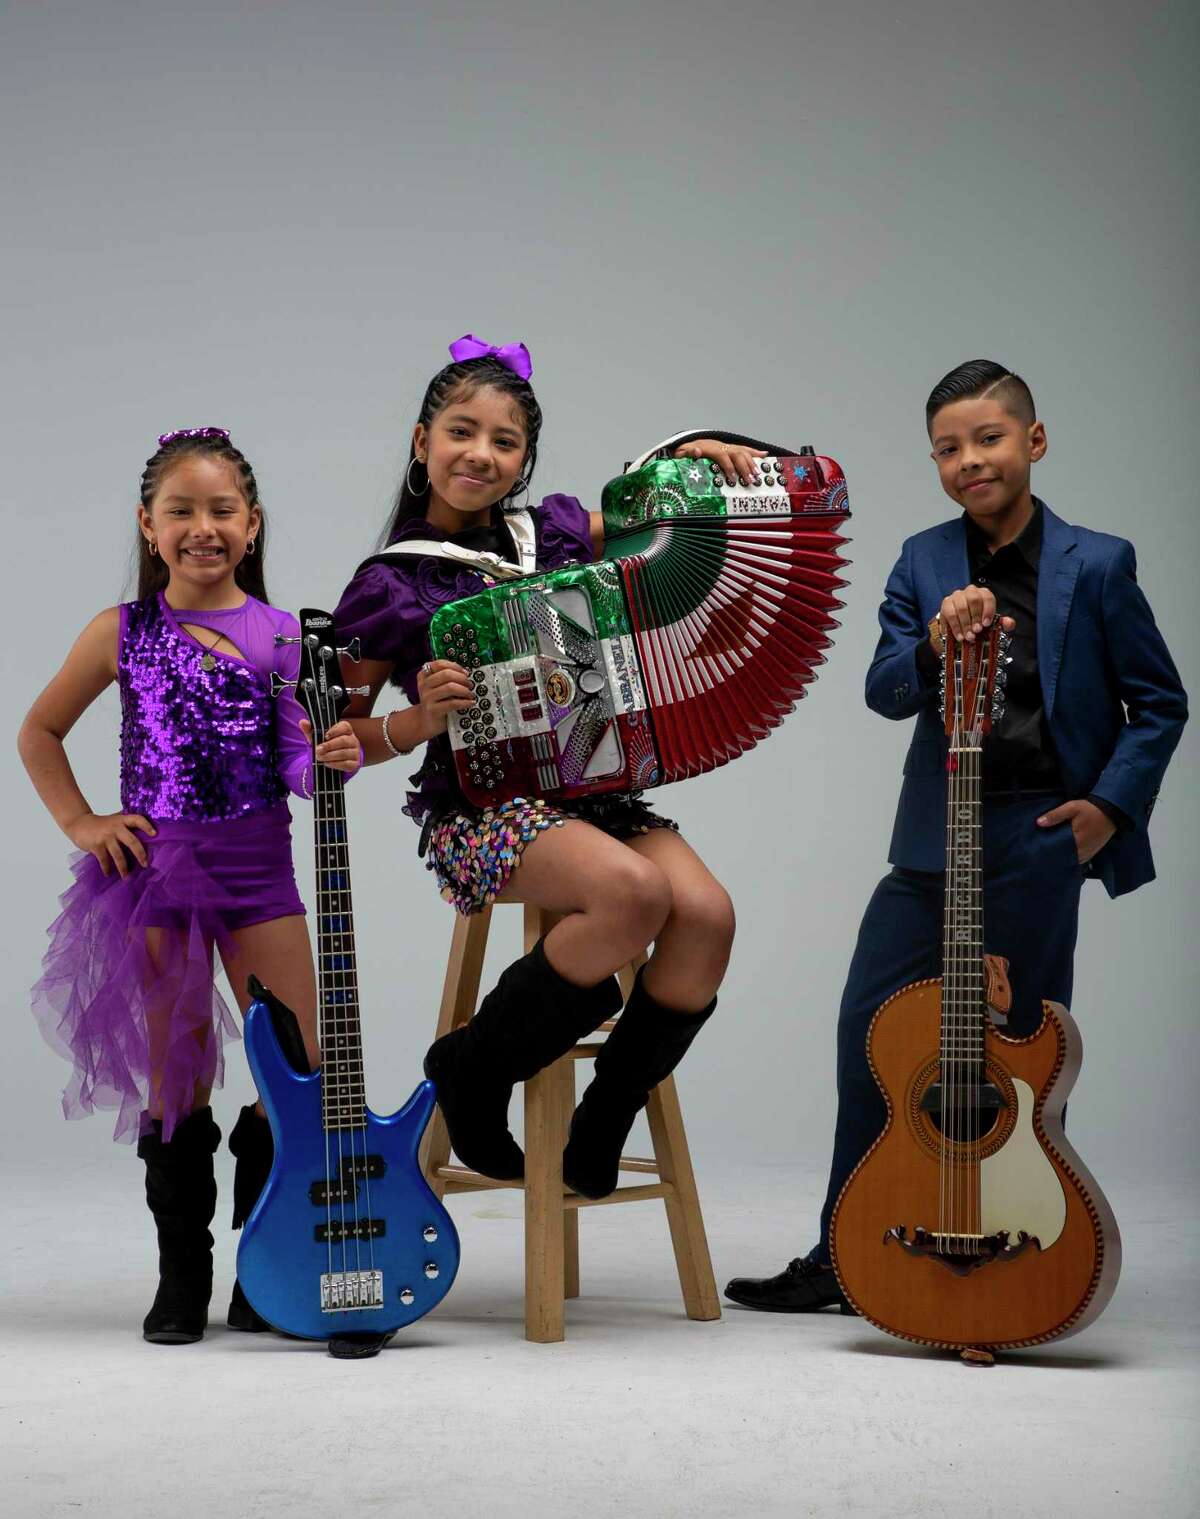 Los Luzeros de Rioverde is a Houston-based family band featuring three siblings, all under the age of 14. They play norteño music and have a huge social media following, including 270,000 Facebook followers and 24,000 on Instagram. Photographed on Friday, Oct. 18, 2019, in Houston.